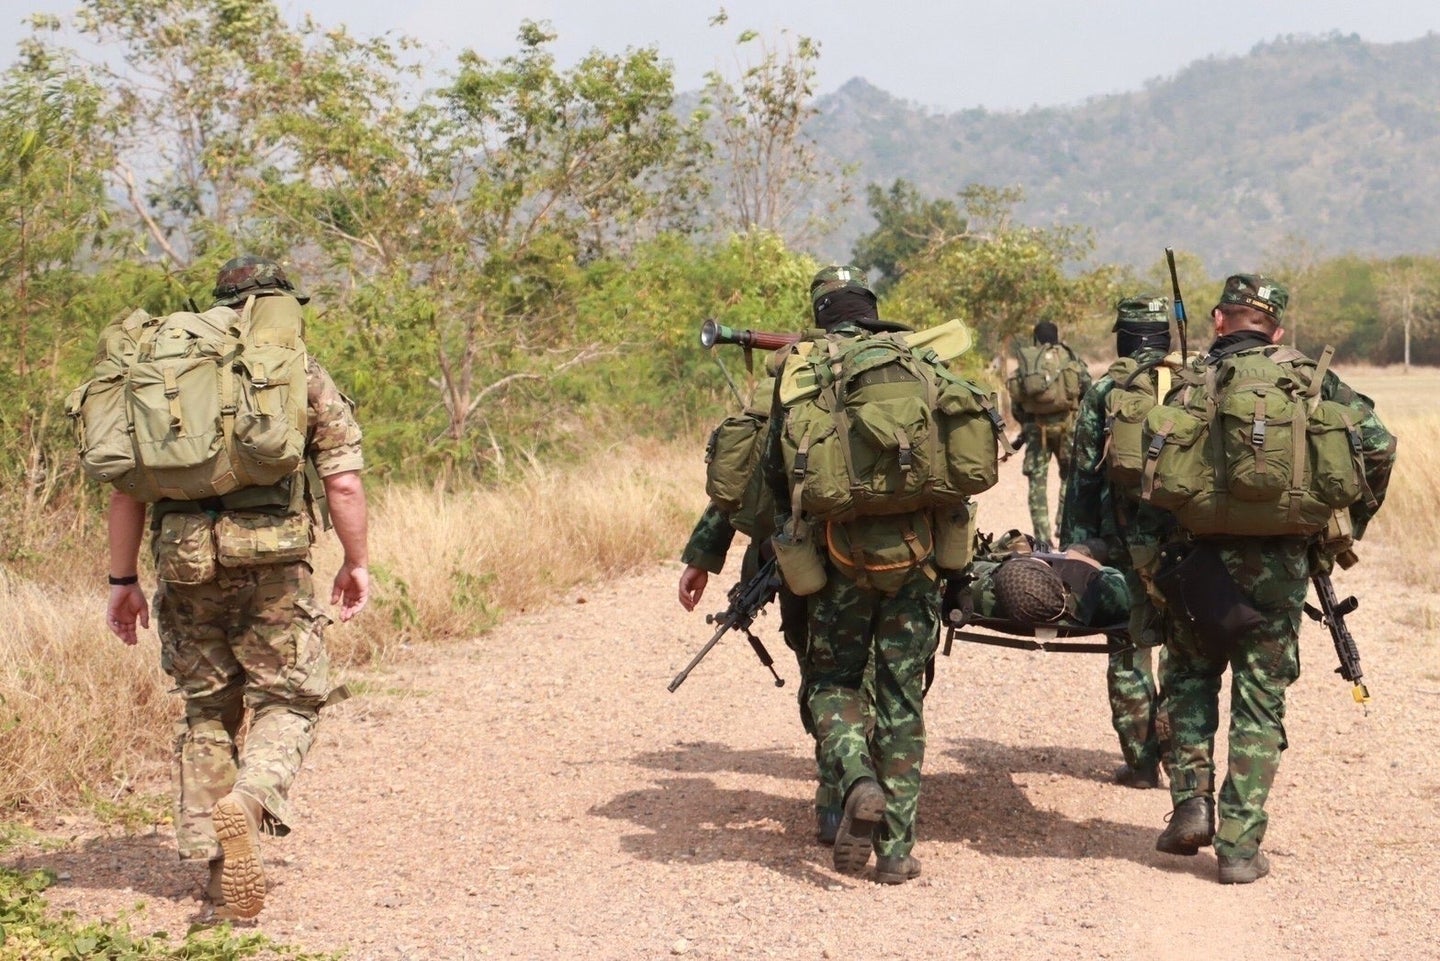 A Green Beret with 1st Special Forces Group (Airborne) accompanies Rangers from the Royal Thai Army 3rd Special Forces Regiment moving a simulated casualty to an extraction point during training March 14-25, 2022. This exchange strengthens coordination and bolsters relationships between U.S. and Thai special operations. A strong, forward-looking U.S.-Thai defense alliance, rooted in history, helps foster a free and open Indo-Pacific region where all countries in the region enjoy prosperity and peace. (U.S. Army courtesy photo)